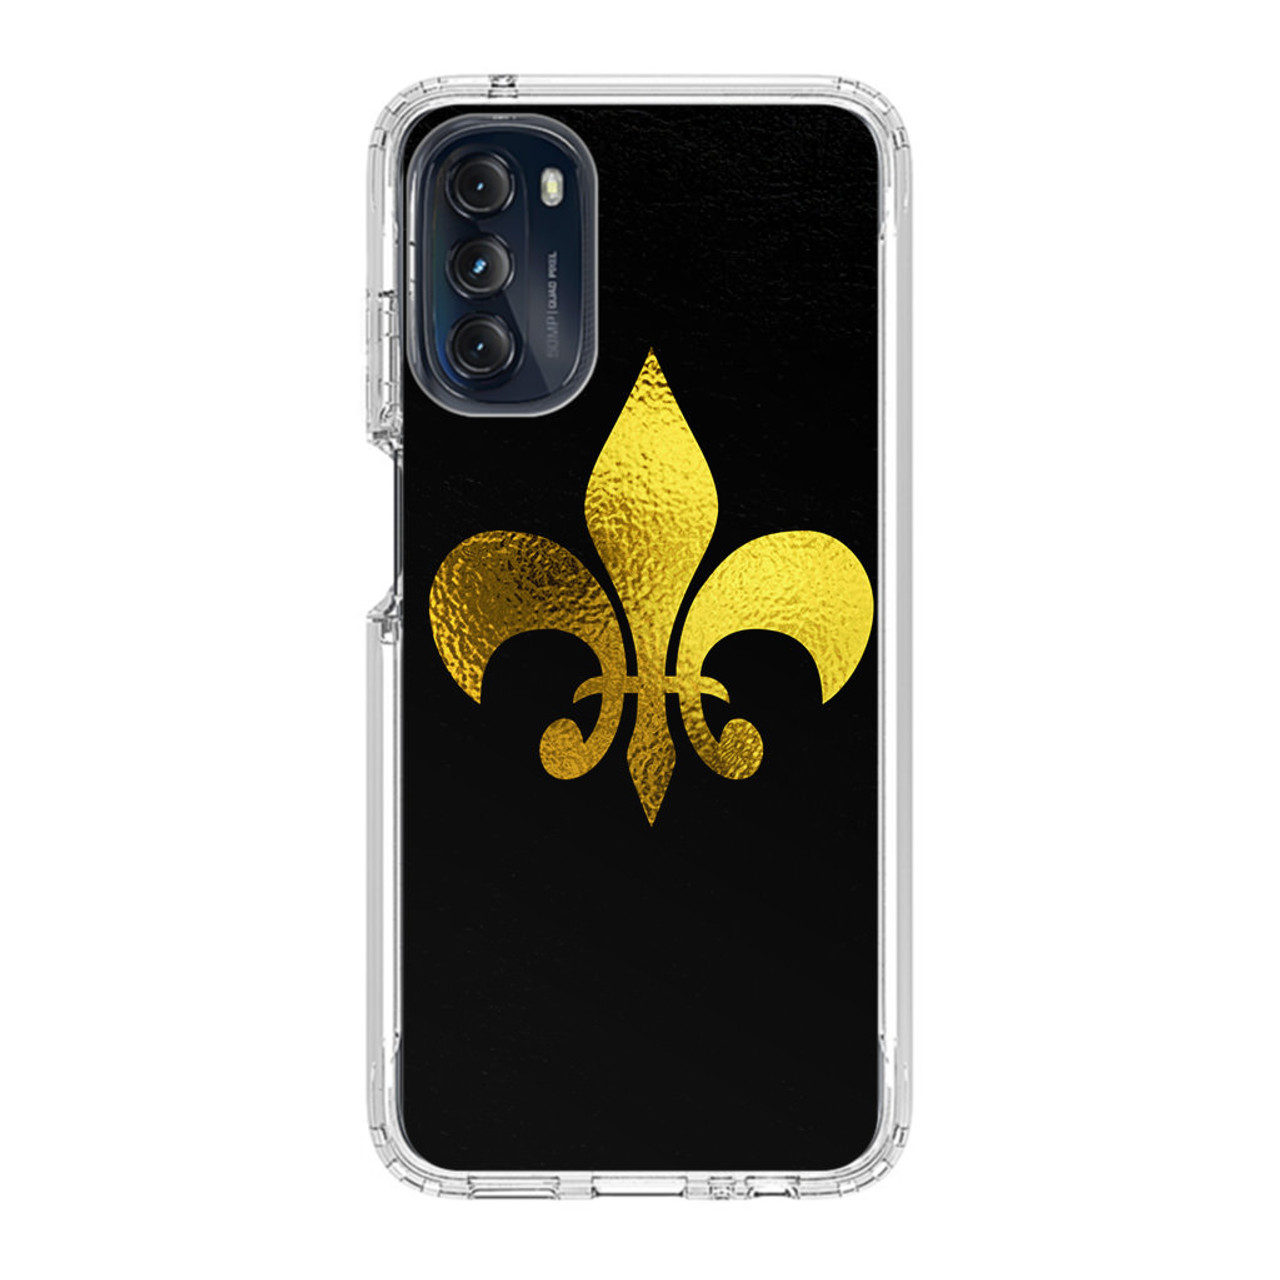 2022 LATEST Louis Vuitton Iphone Cases - HE